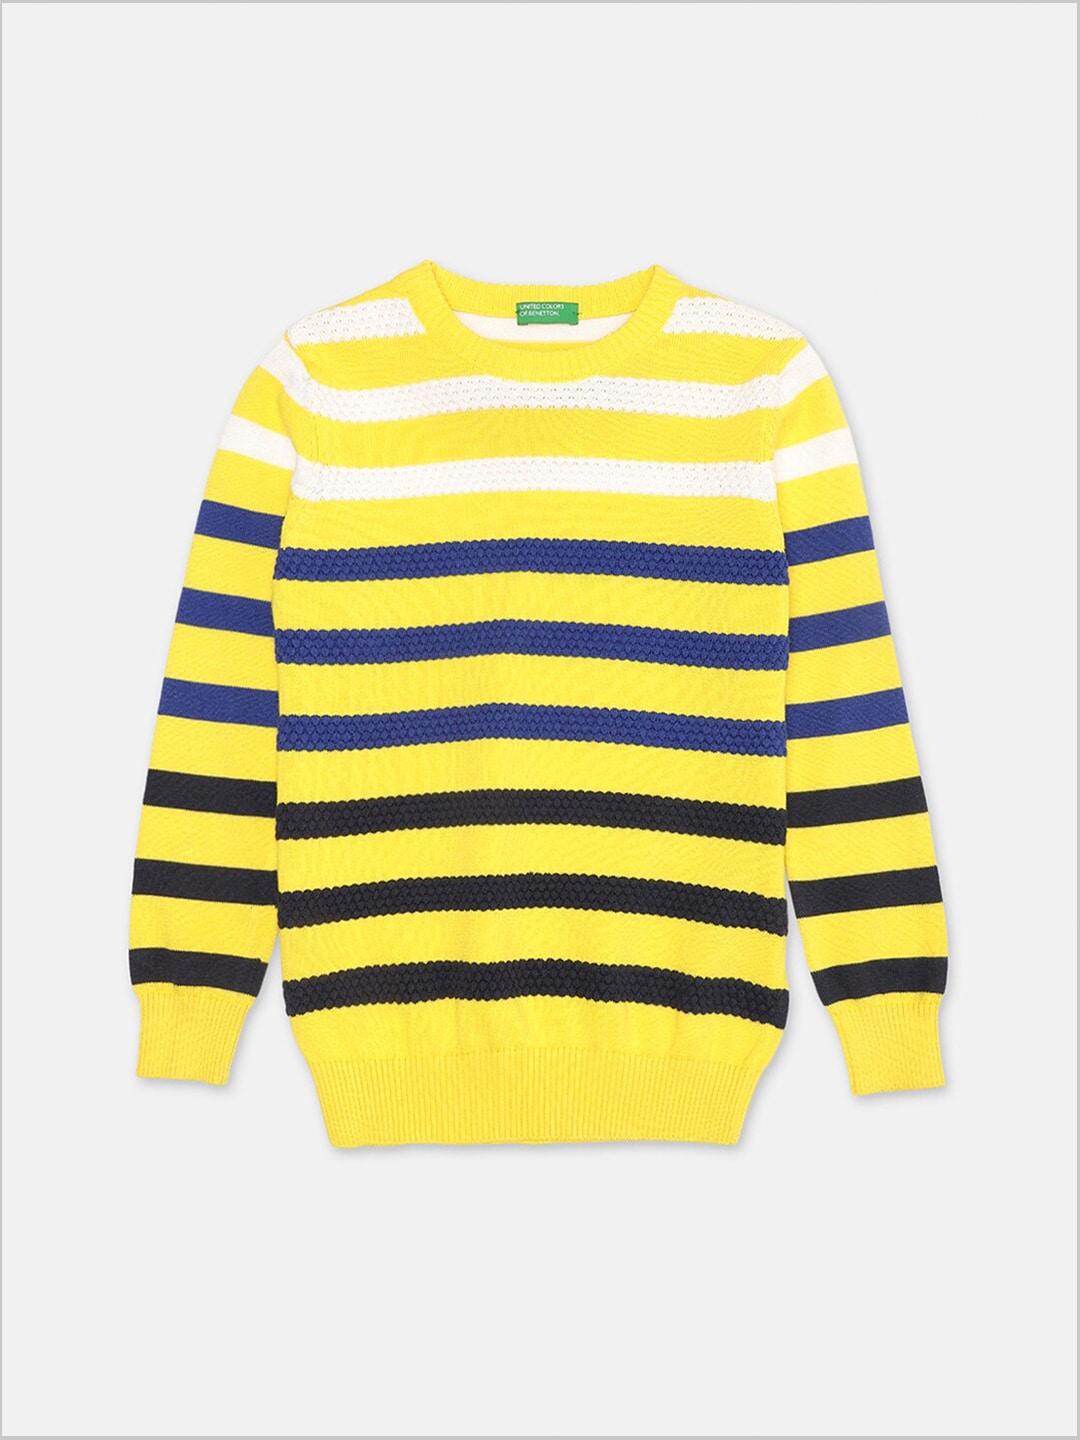 United Colors of Benetton Boys Printed Striped Pullover Sweater